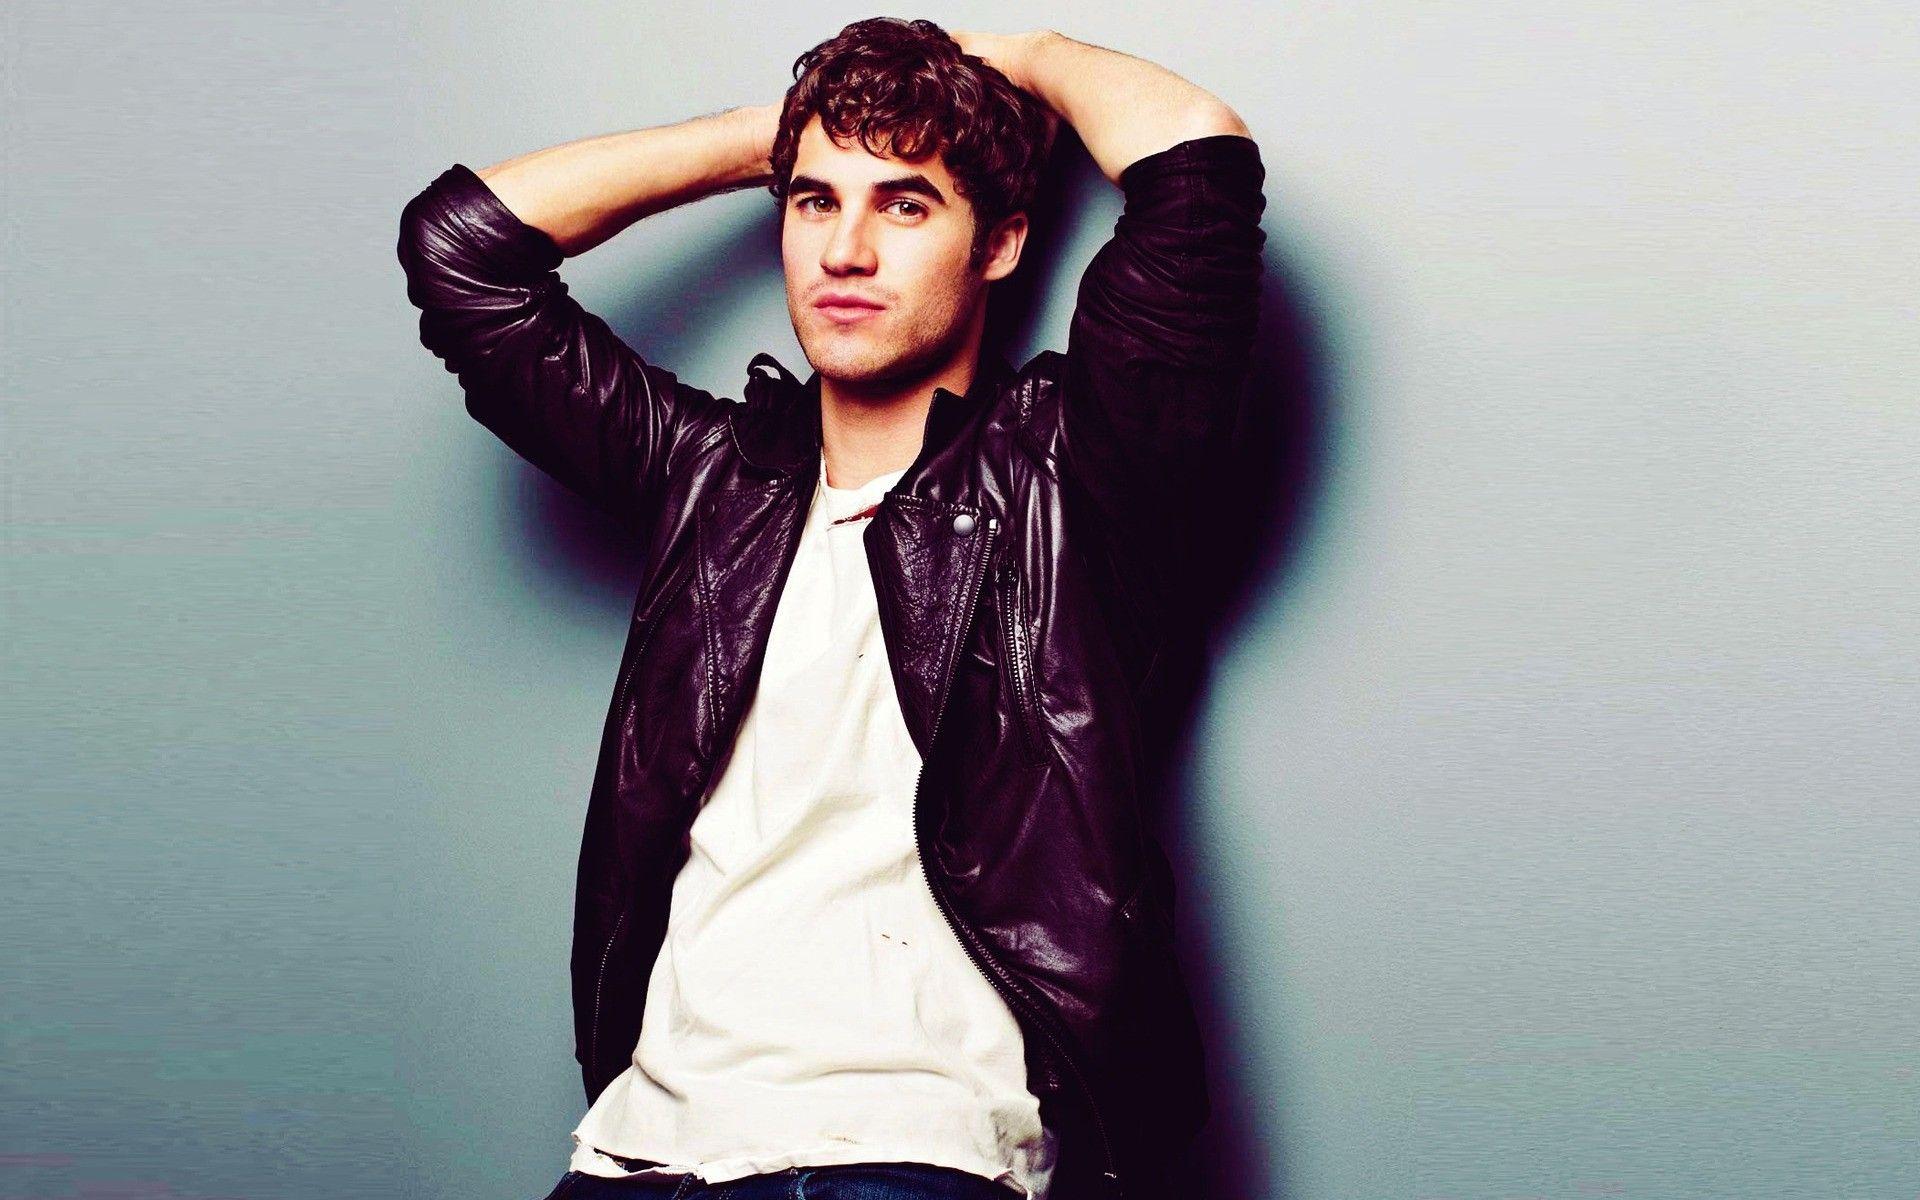 Darren Criss Shooting. Android wallpaper for free